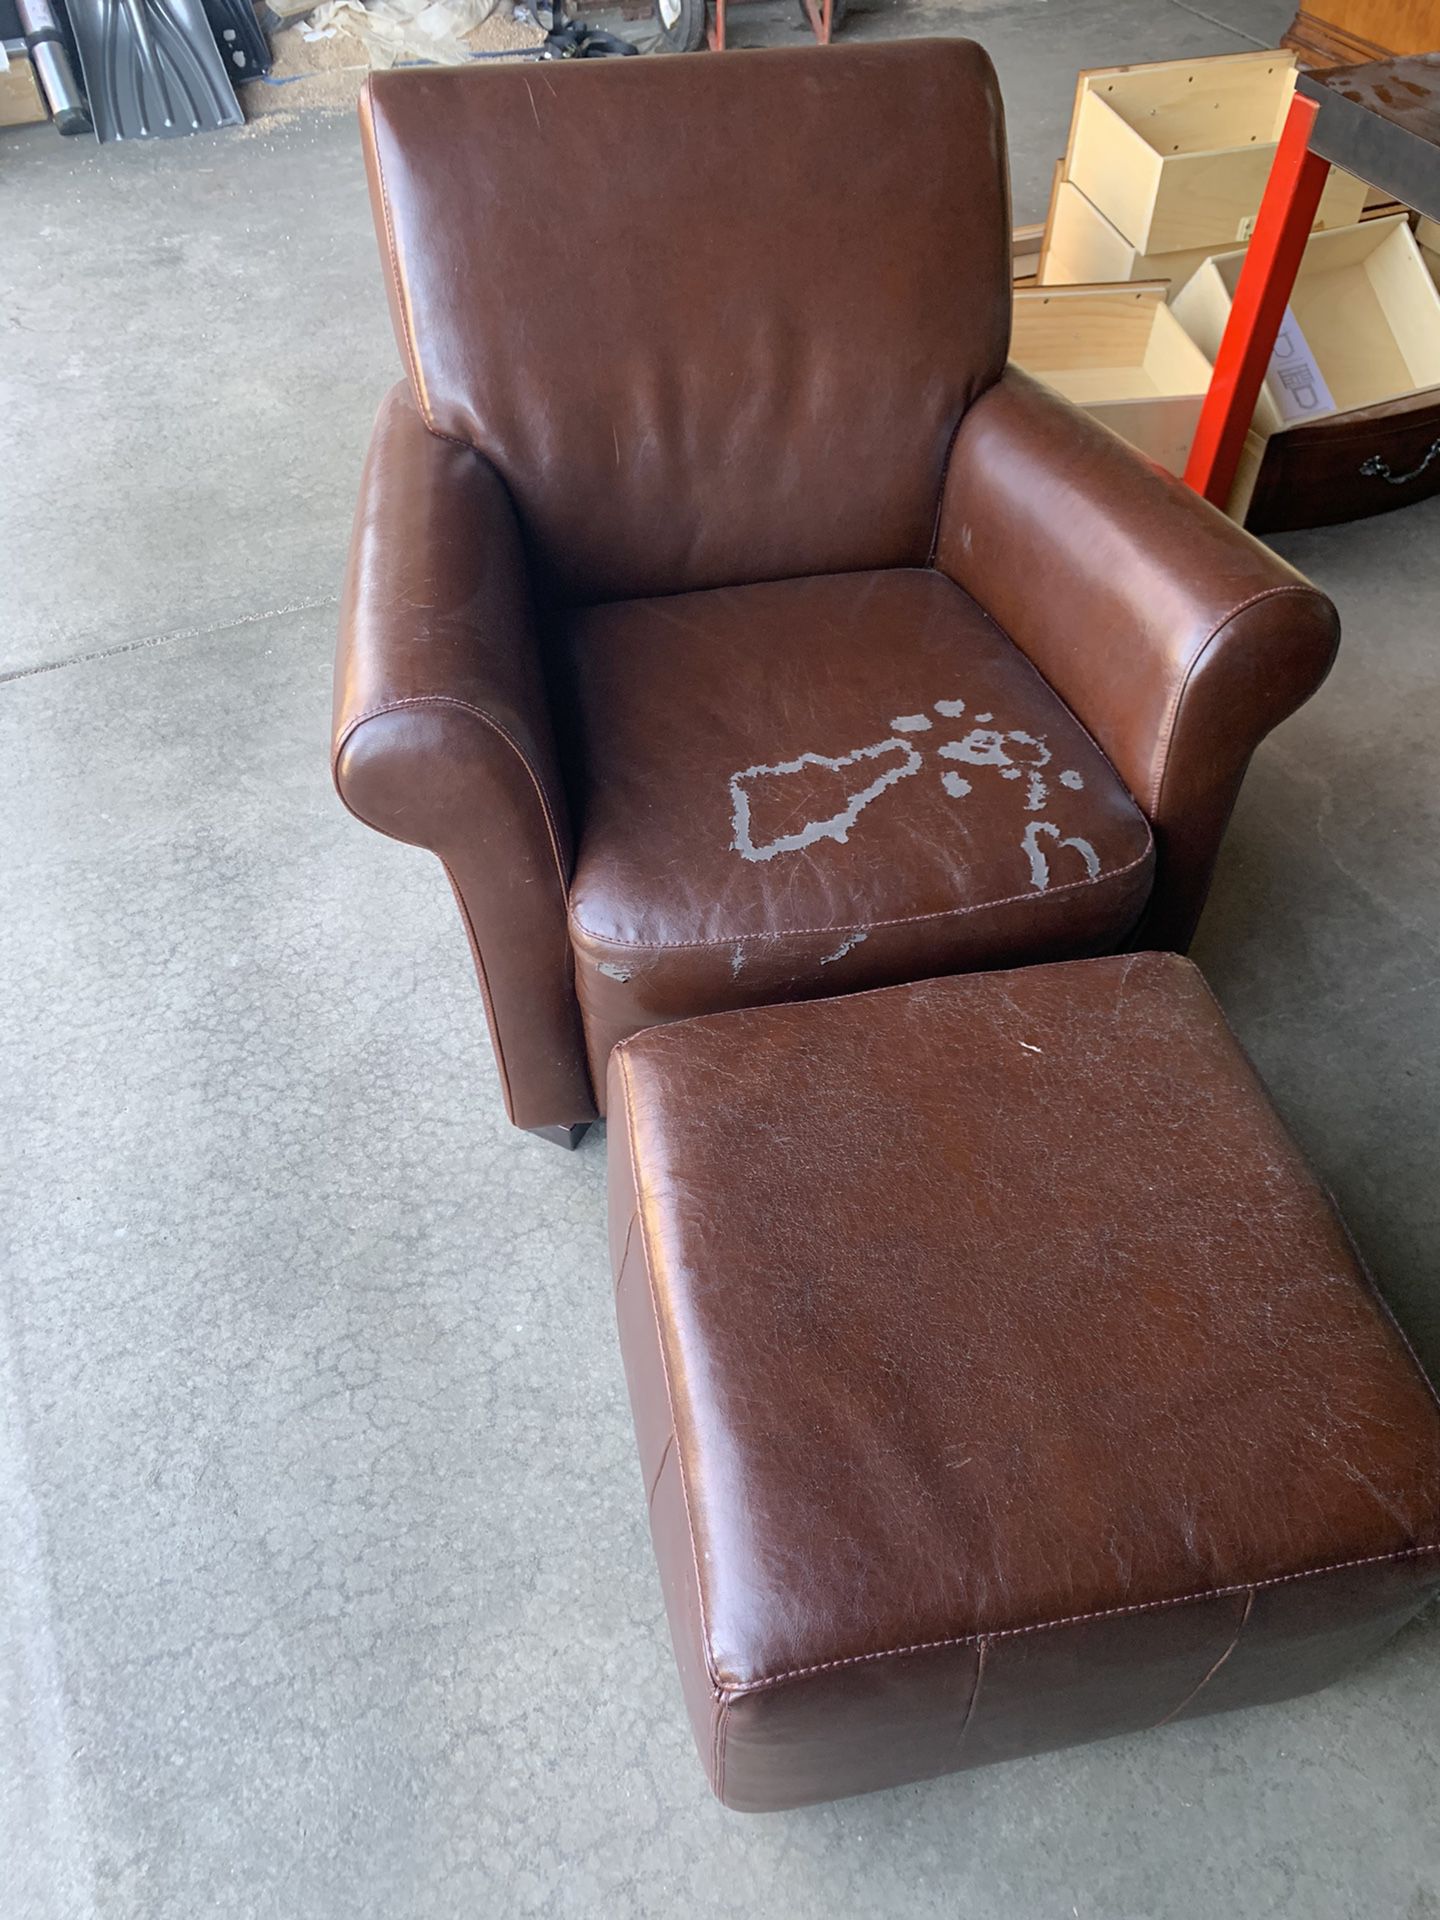 Leather chair and foot rest